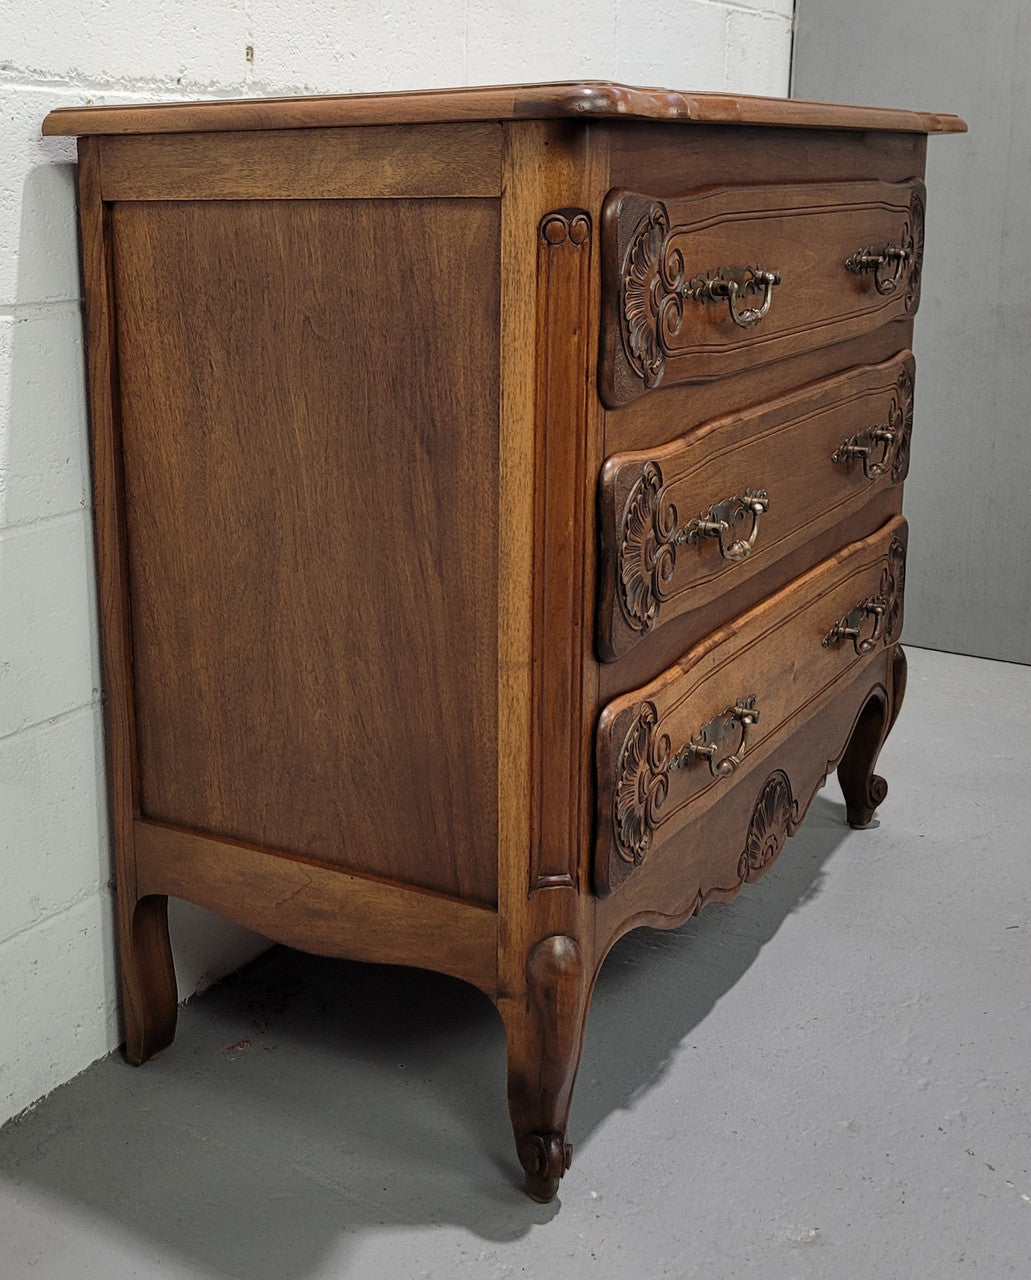 A French Walnut carved three drawer commode with lovely handles and in good original detailed condition.A French Walnut carved three drawer commode with lovely handles and in good original detailed condition.